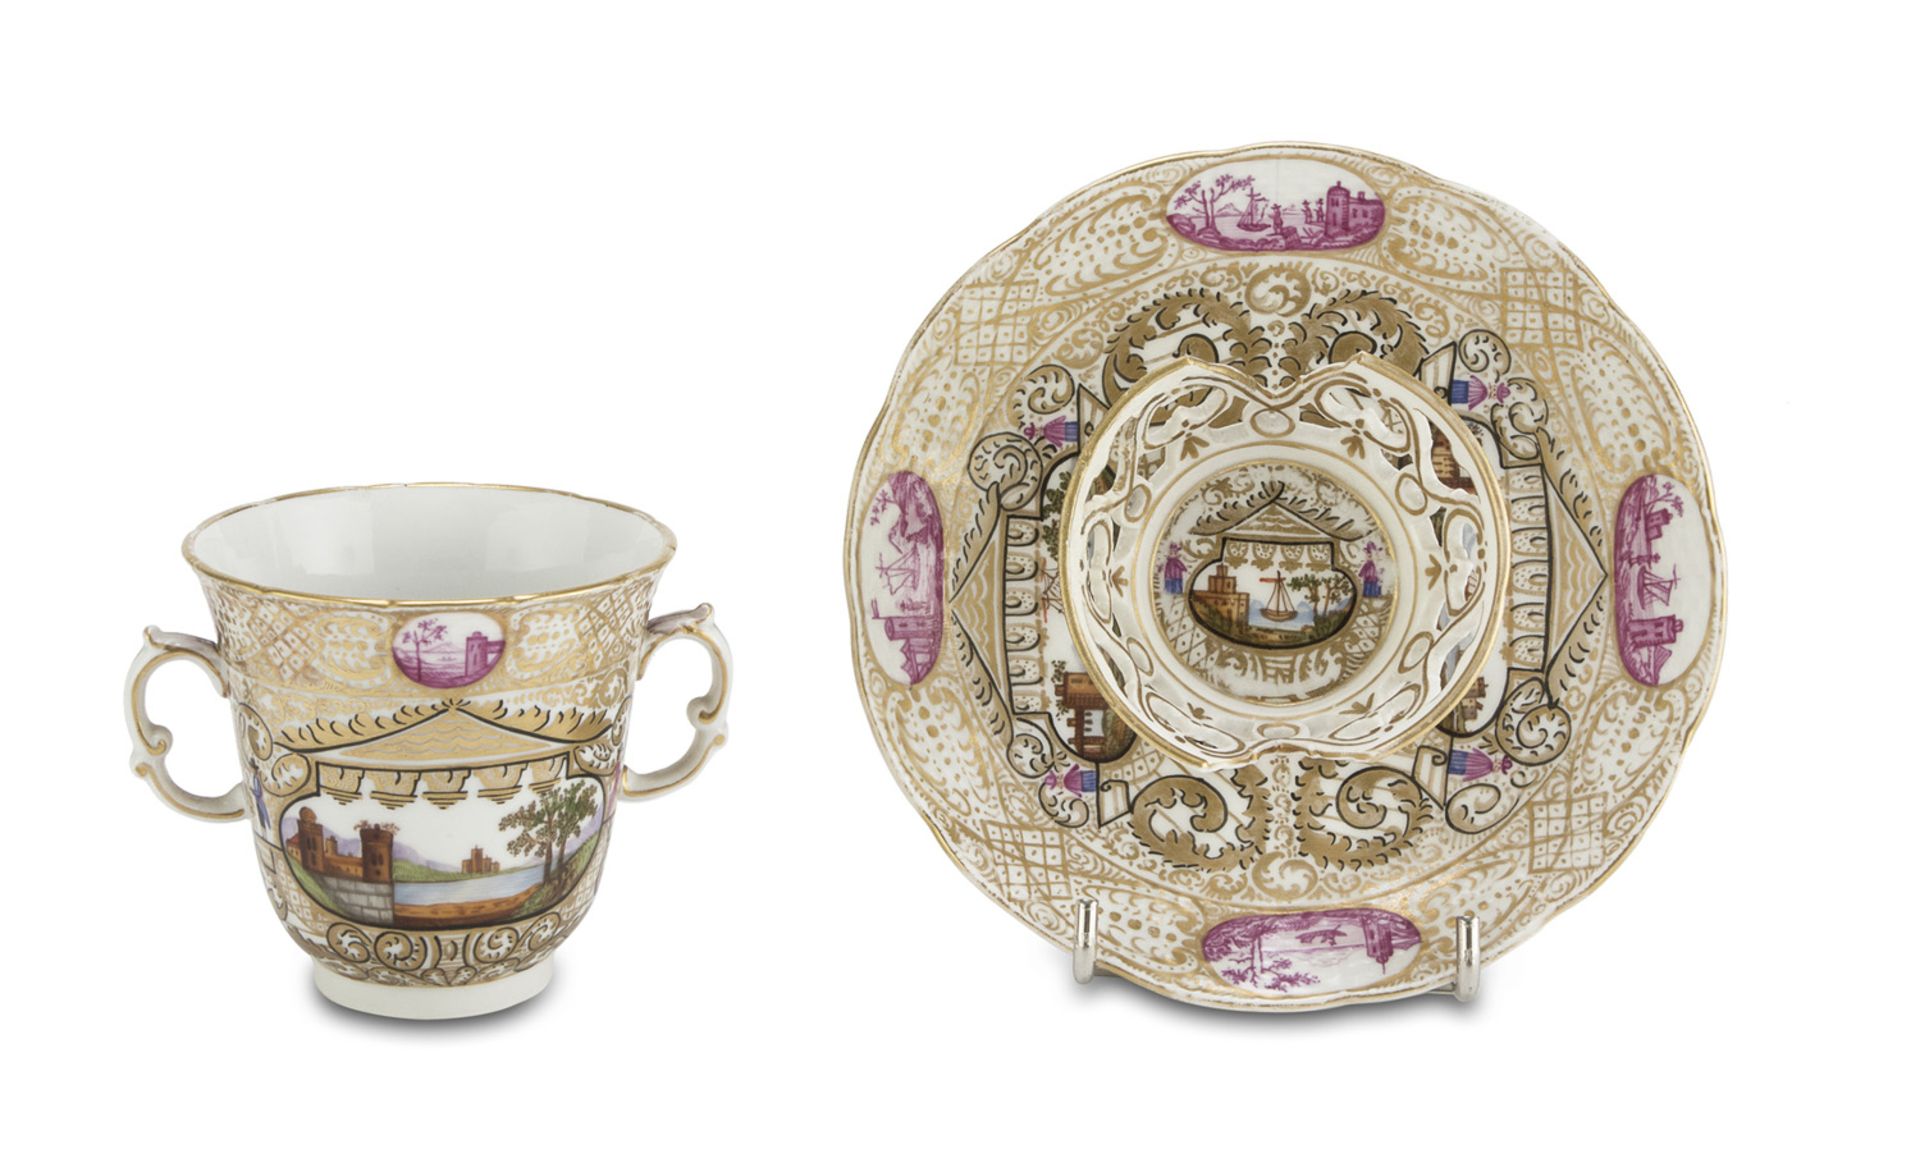 PORCELAIN CUP AND SAUCER BERLIN 19TH CENTURY